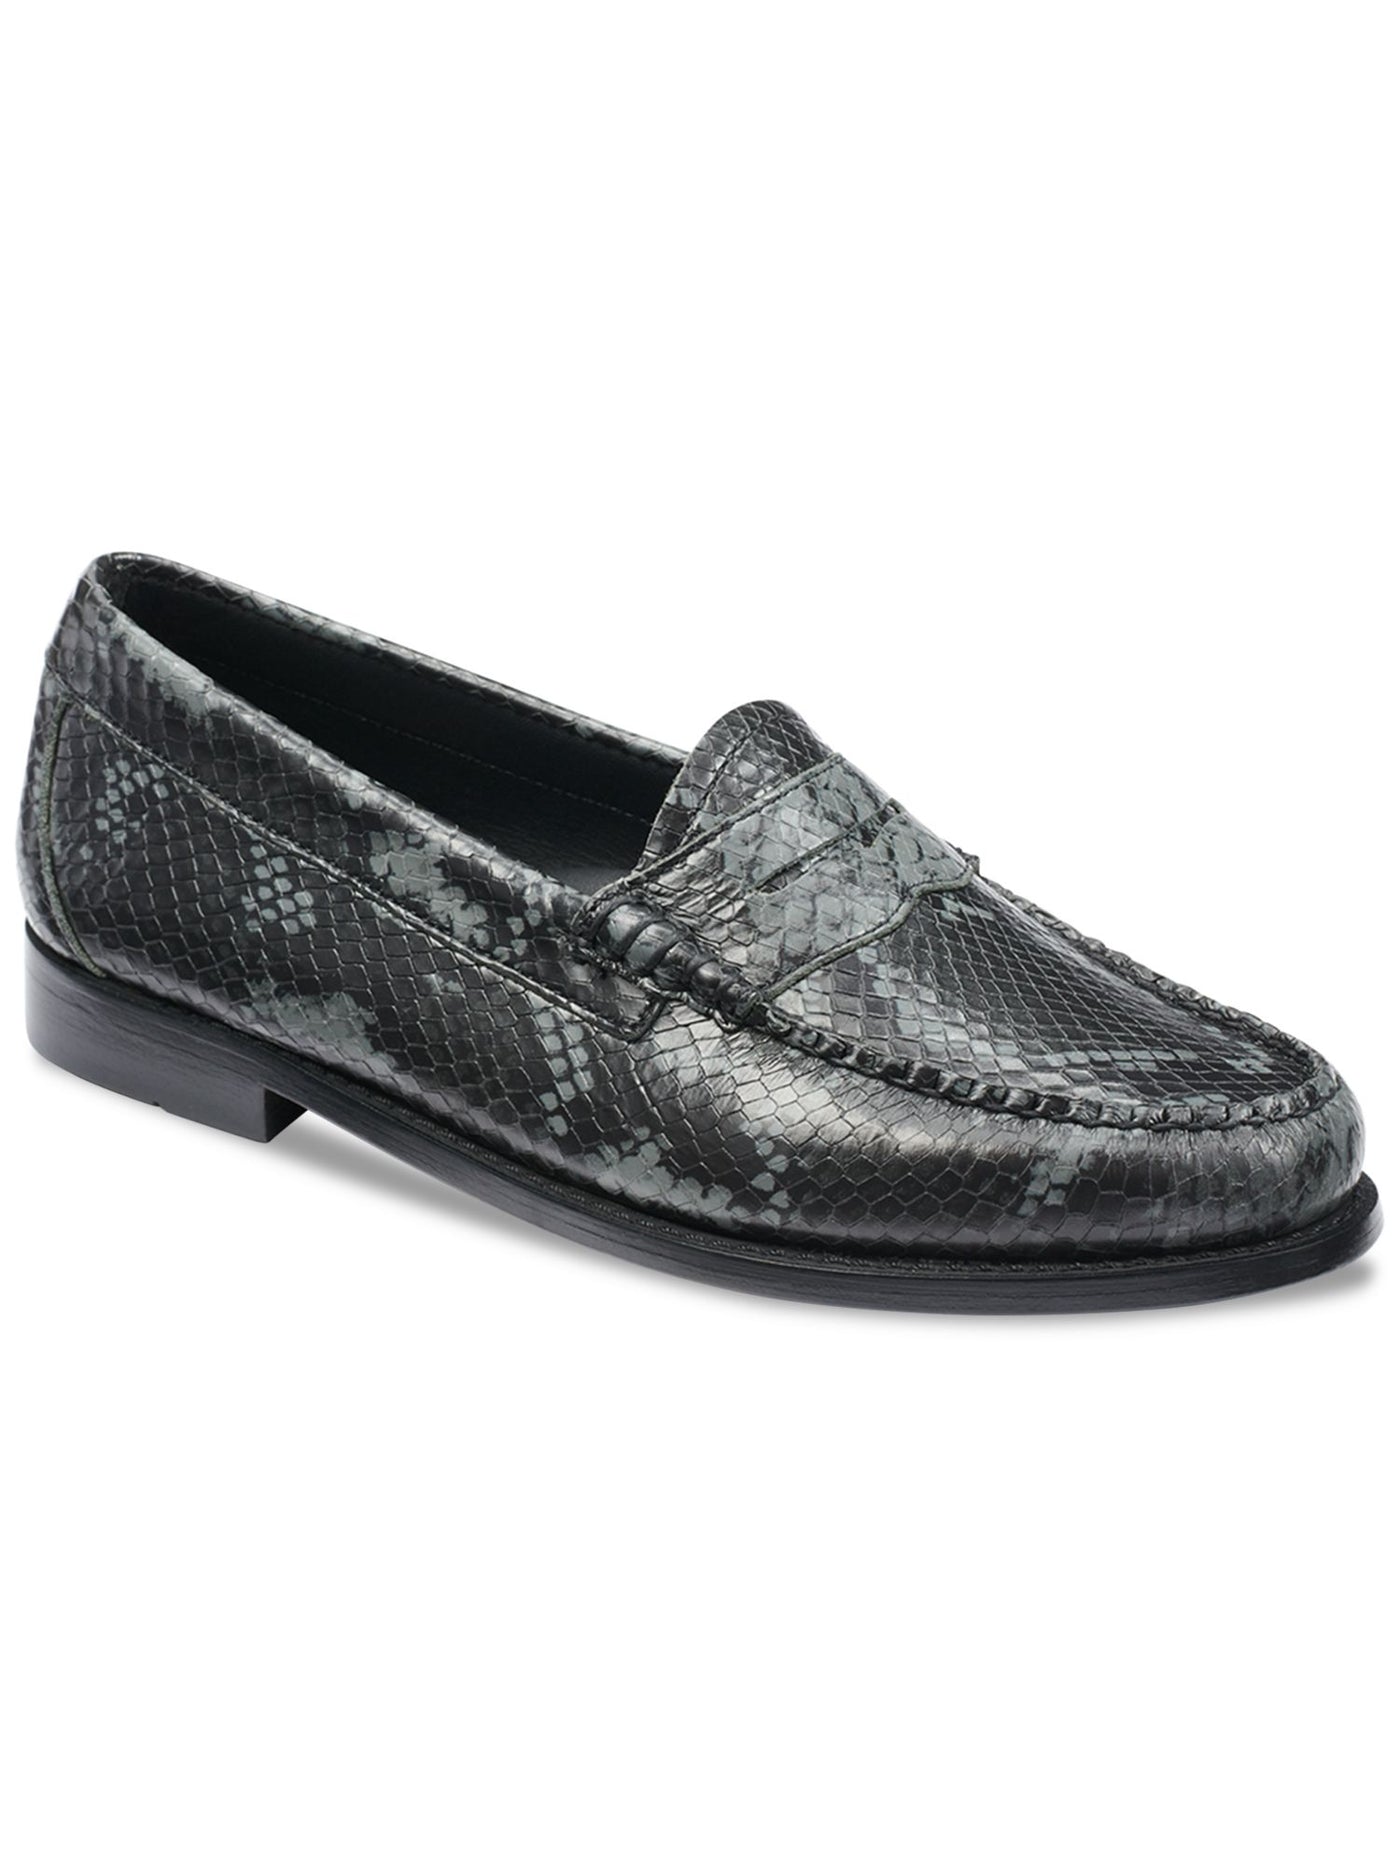 G.H. BASS Womens Black Snake Print Penny Keeper Padded Whitney Exotic Round Toe Slip On Leather Loafers Shoes 9 M